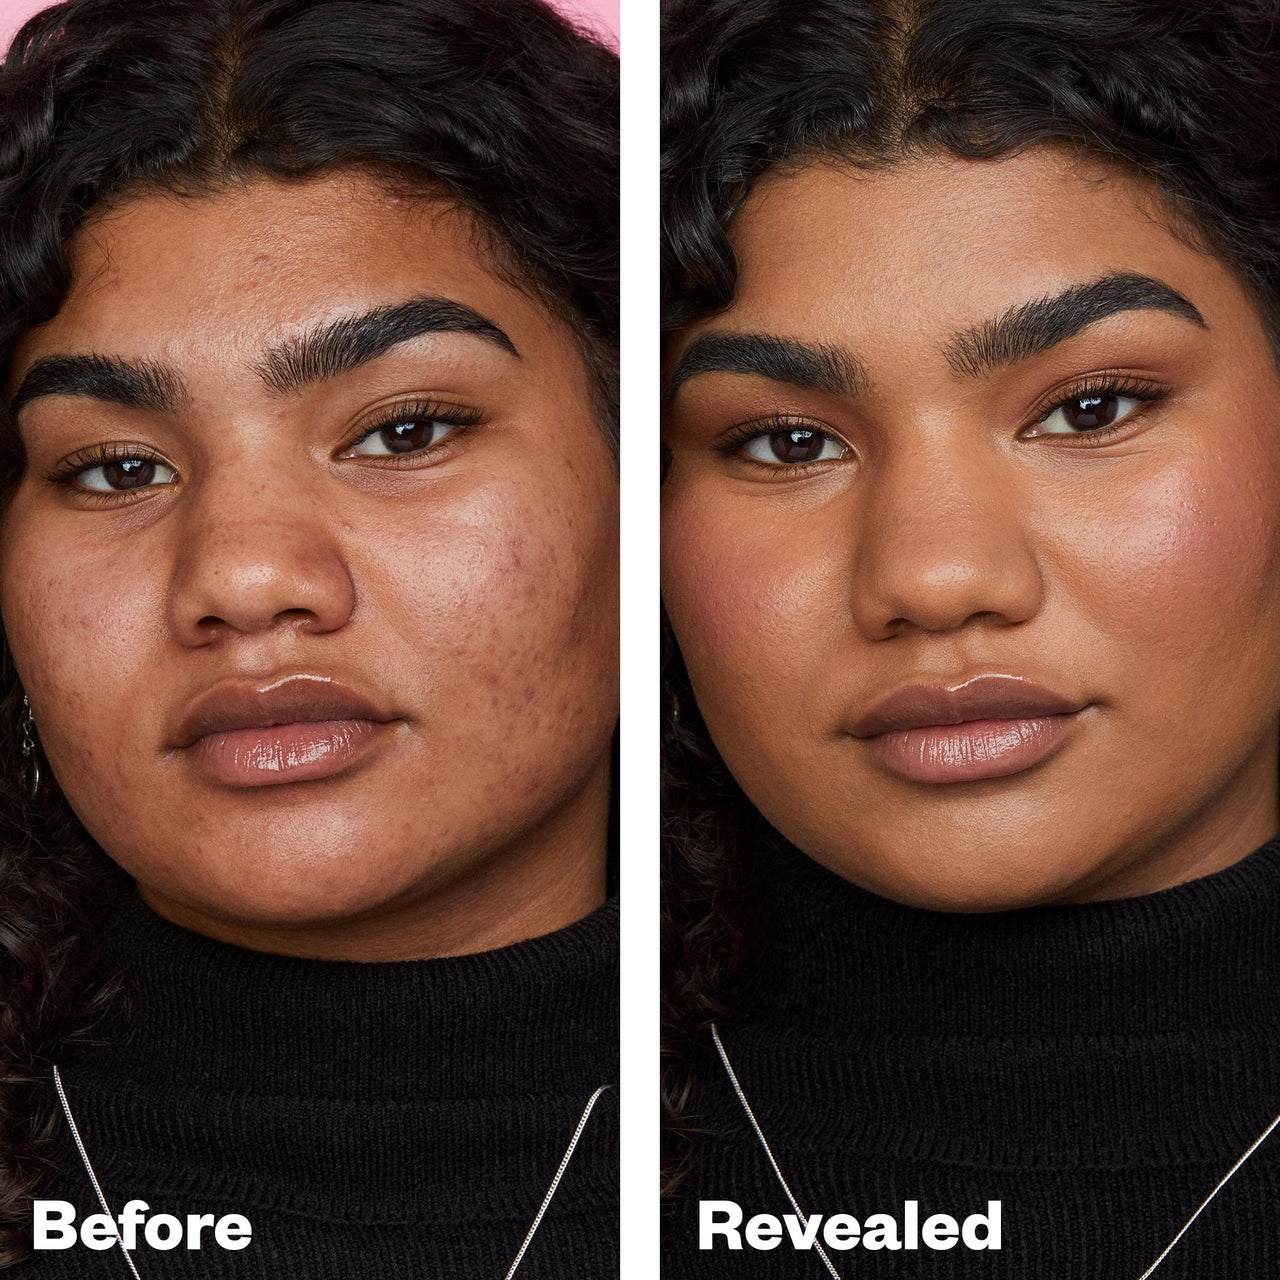 Before and after makeup that is skincare